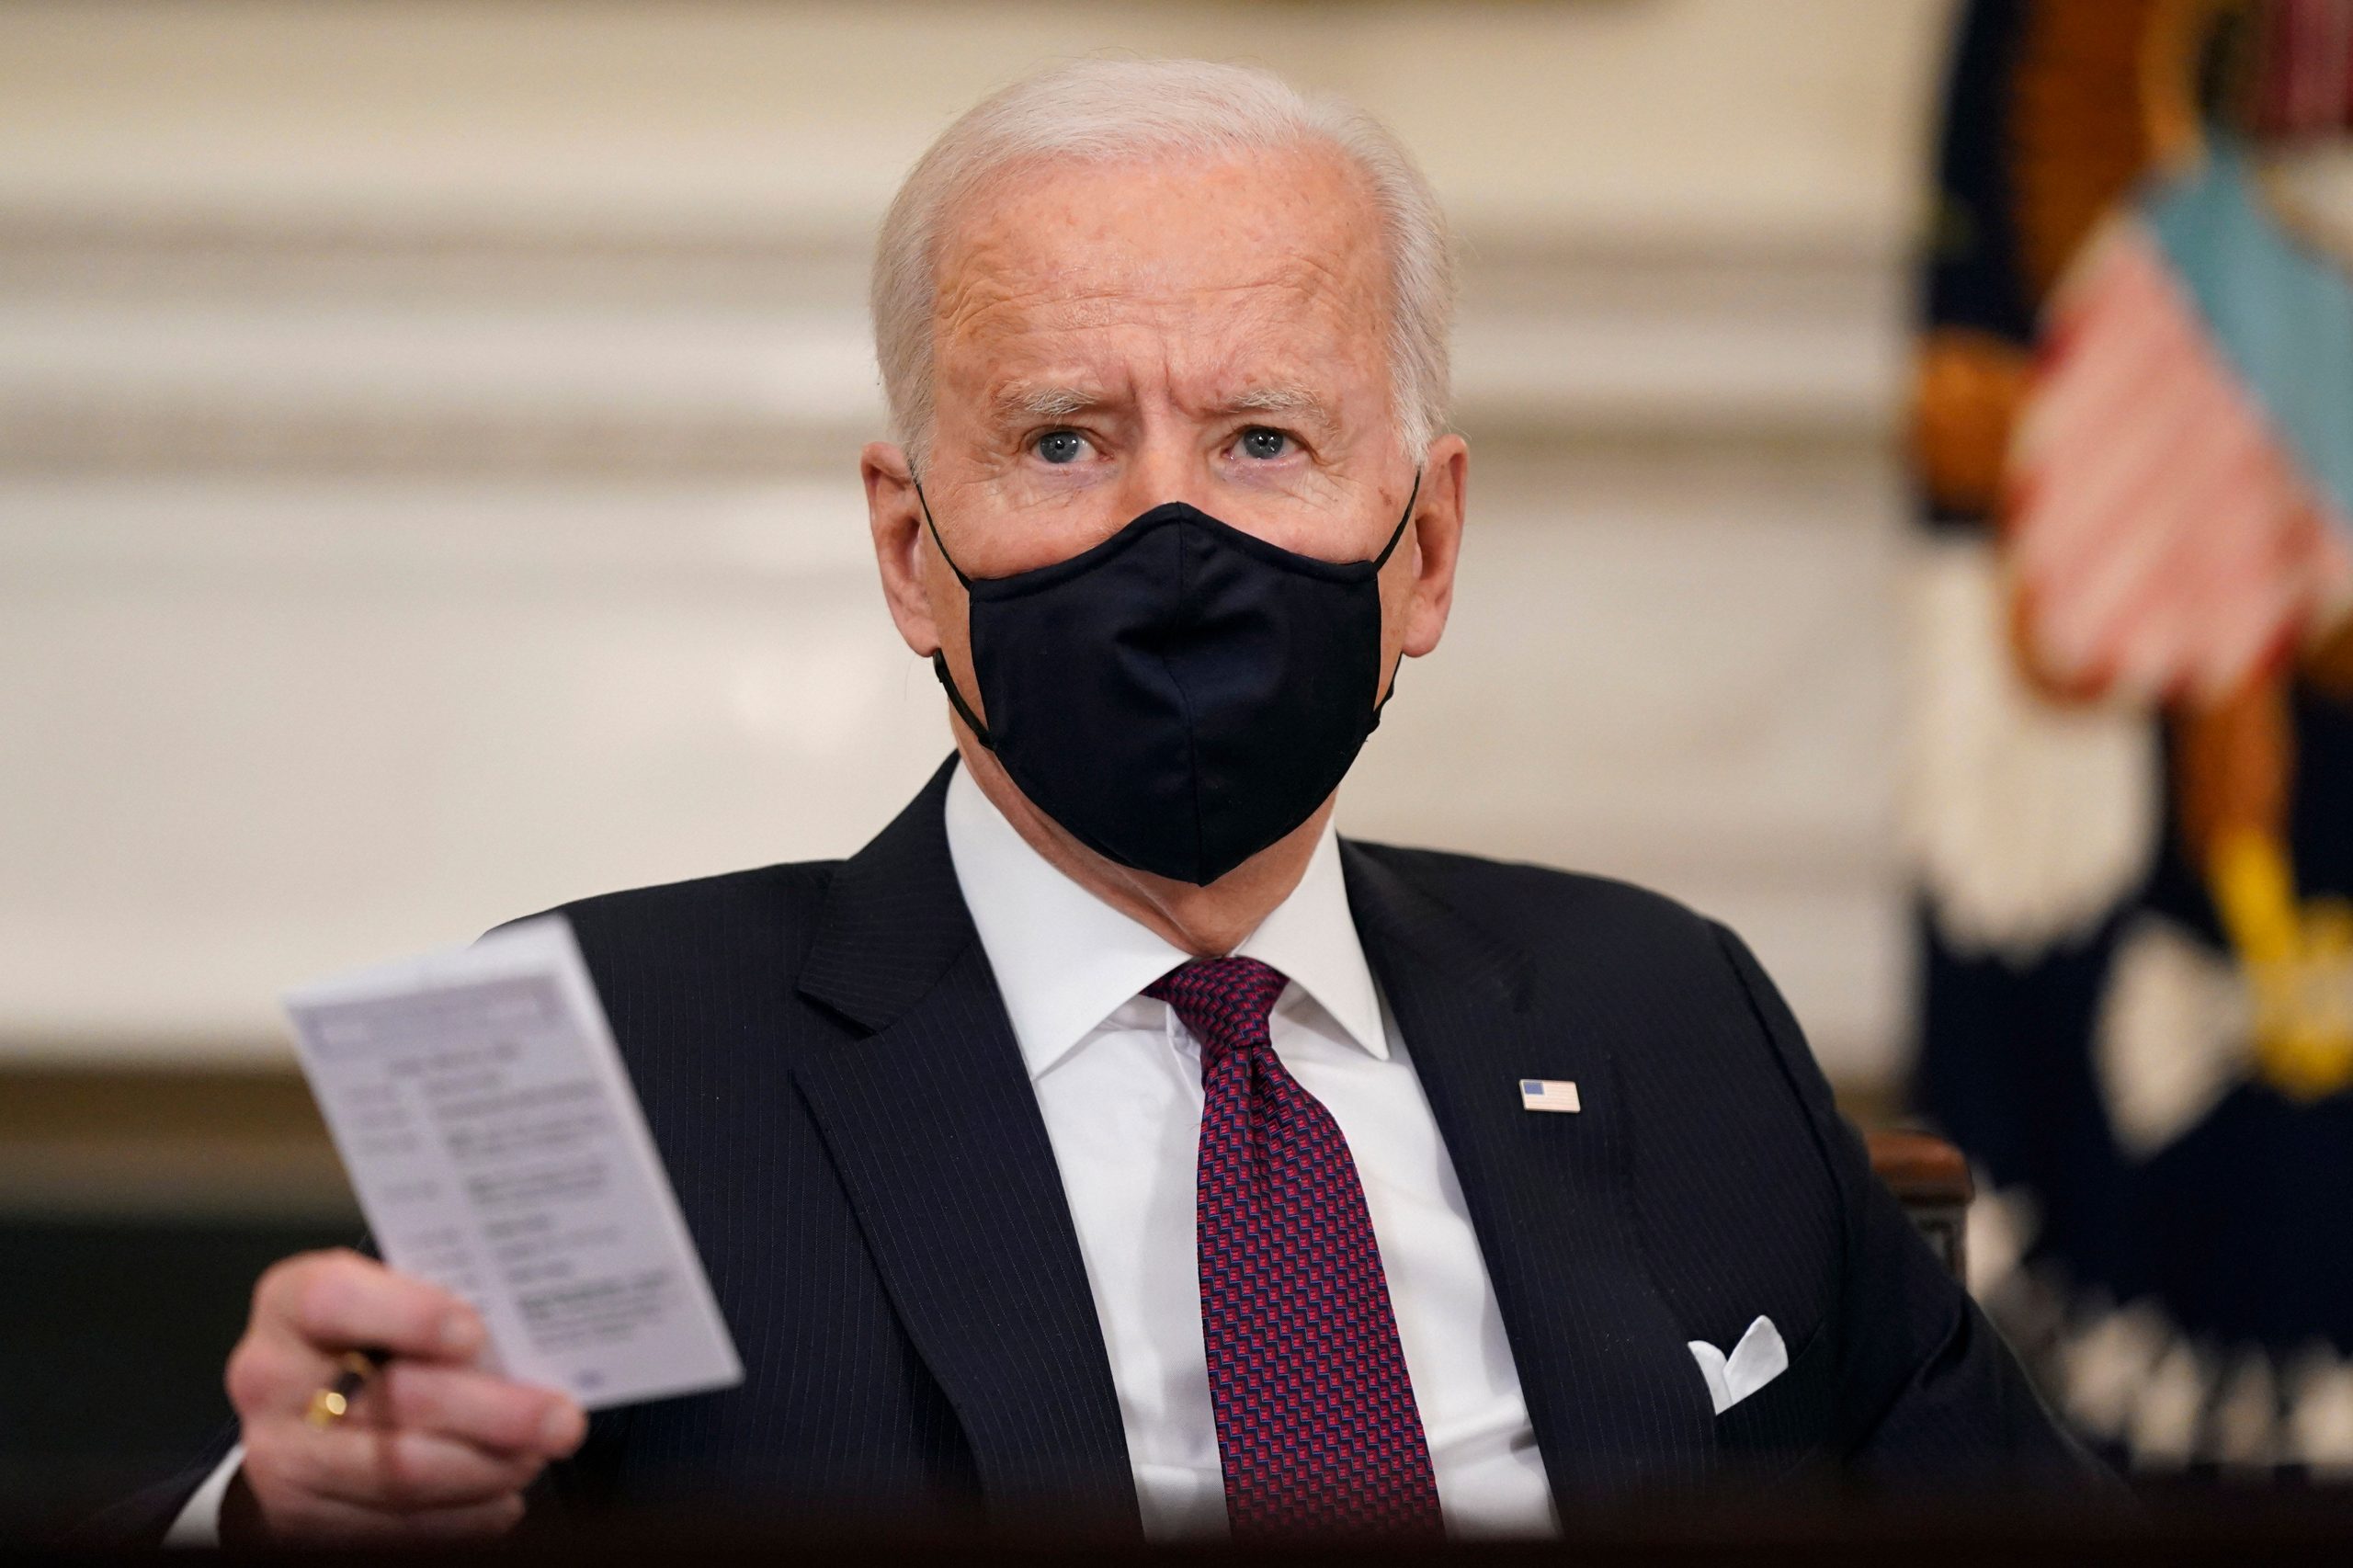 ‘Too often, we’ve turned against one another’: Joe Biden condemns racist attacks on Asian Americans